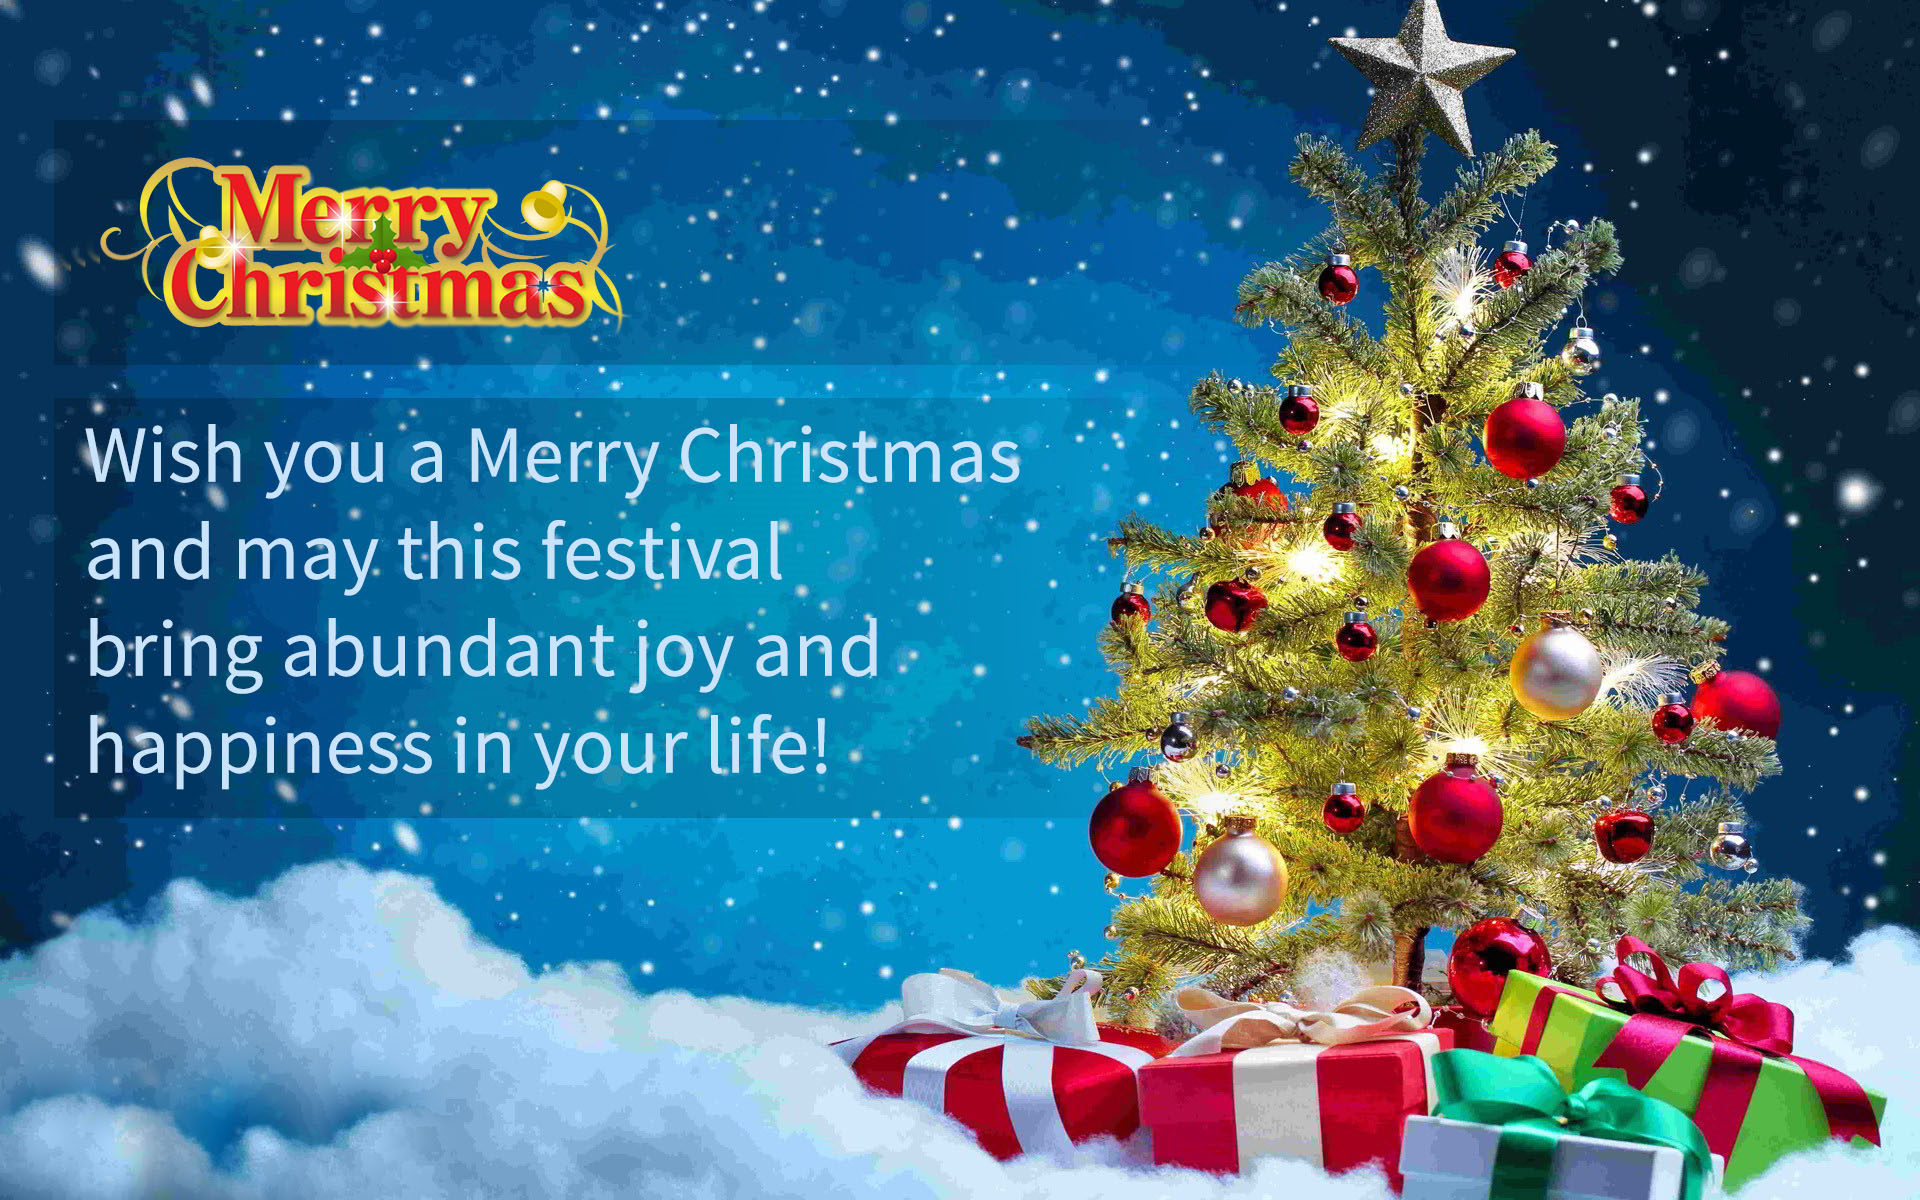 Merry Christmas Quotes - Merry Xmas Quotation 2019 - Merry Christmas Santa Claus Slogans